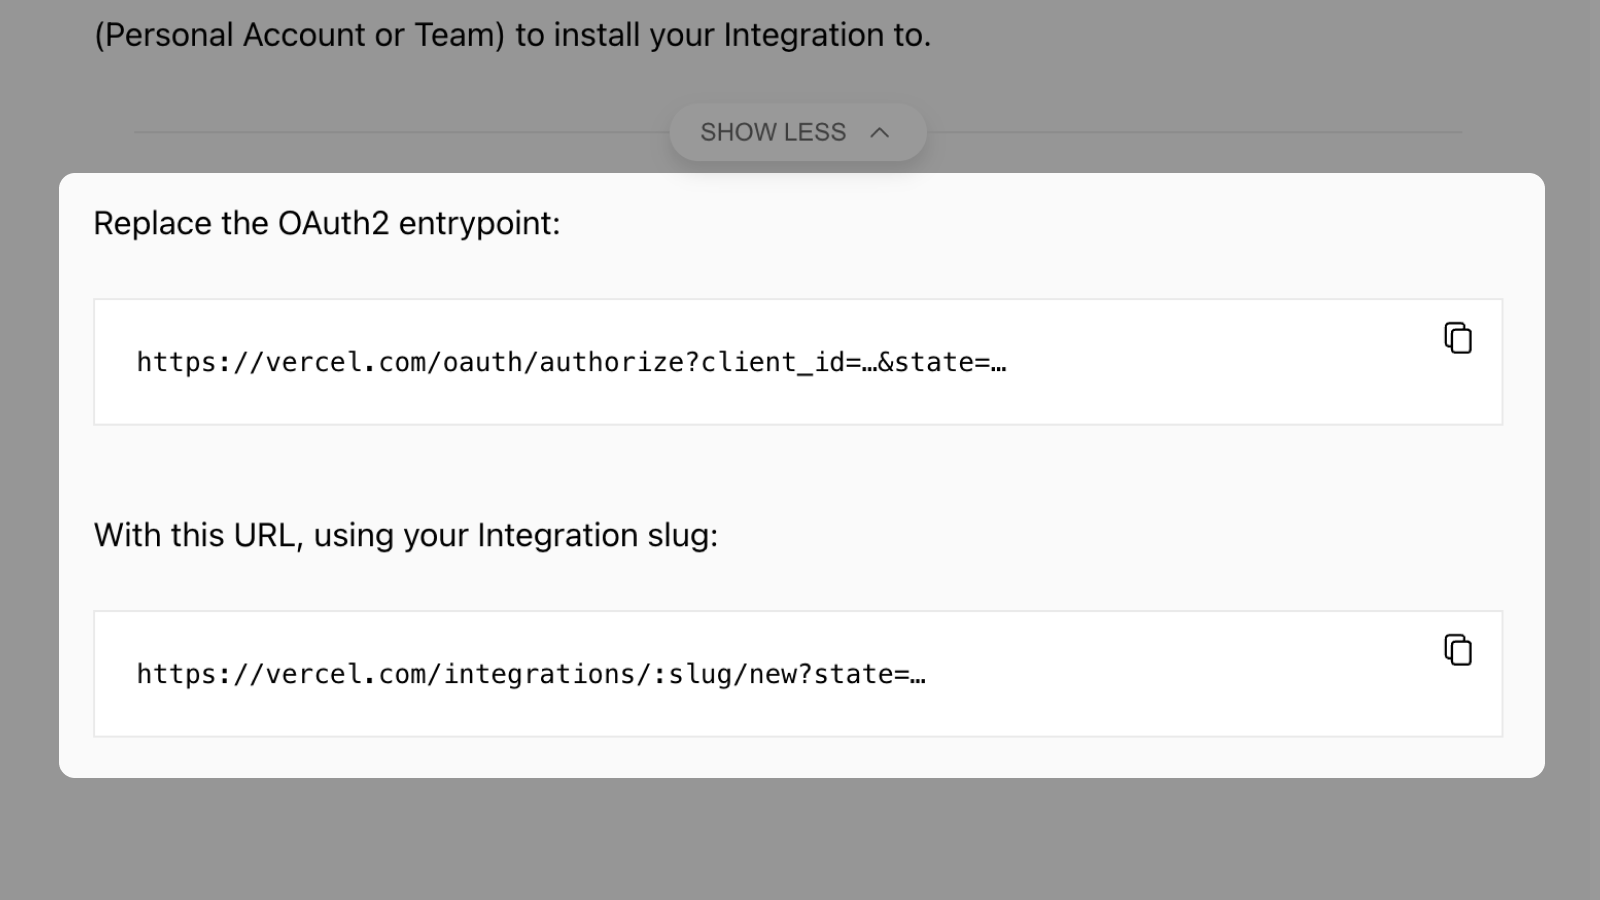 Cover for Sunsetting the OAuth2 integration entrypoint